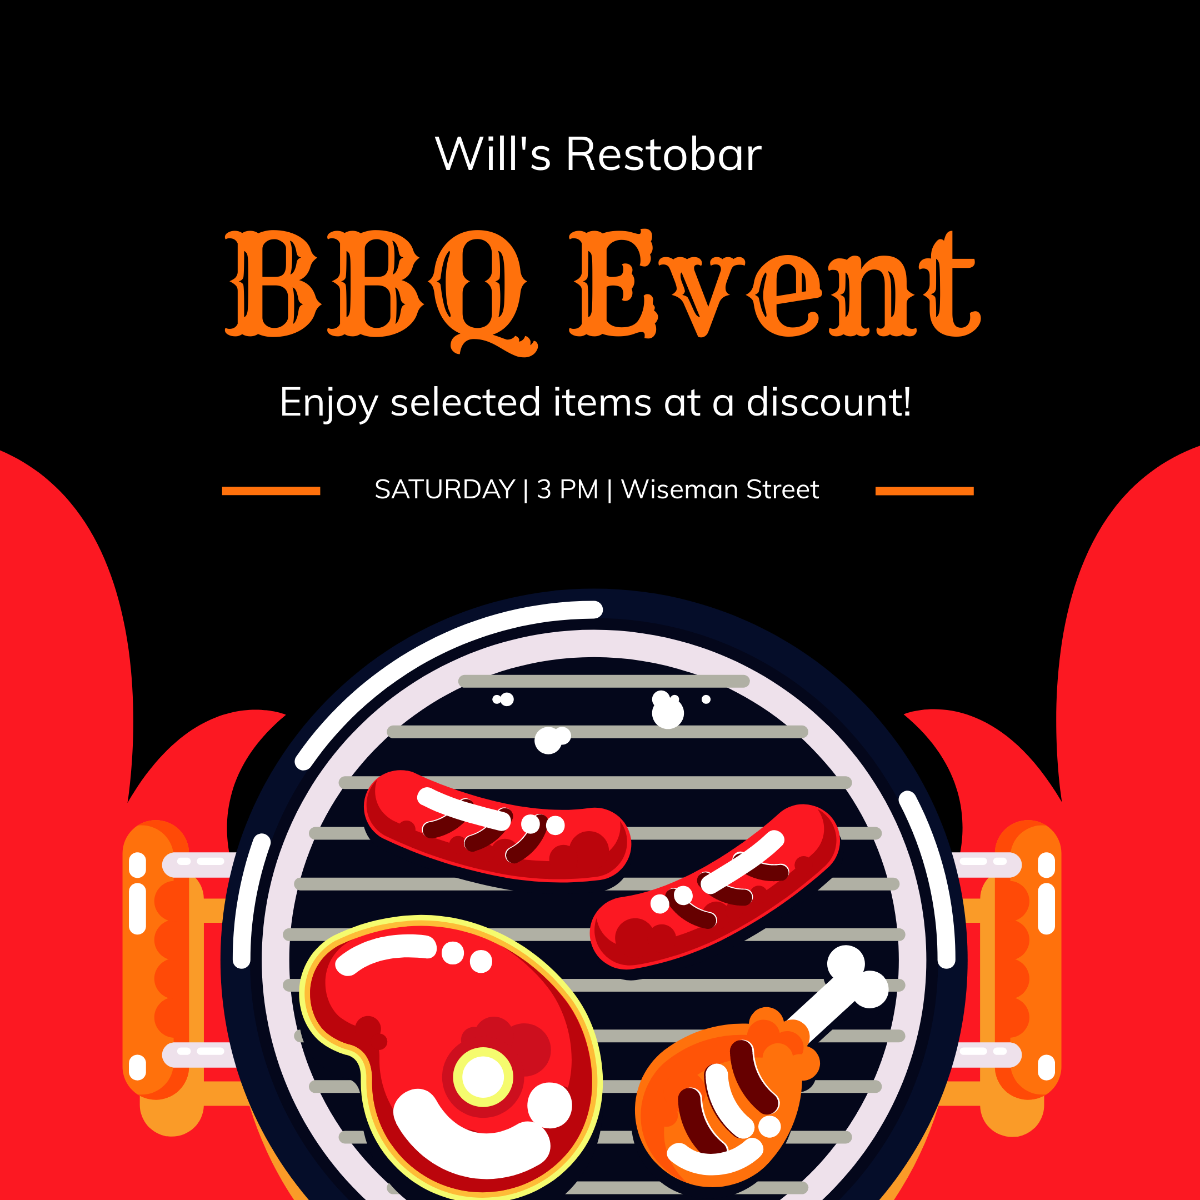 Free BBQ Event Instagram Post Template